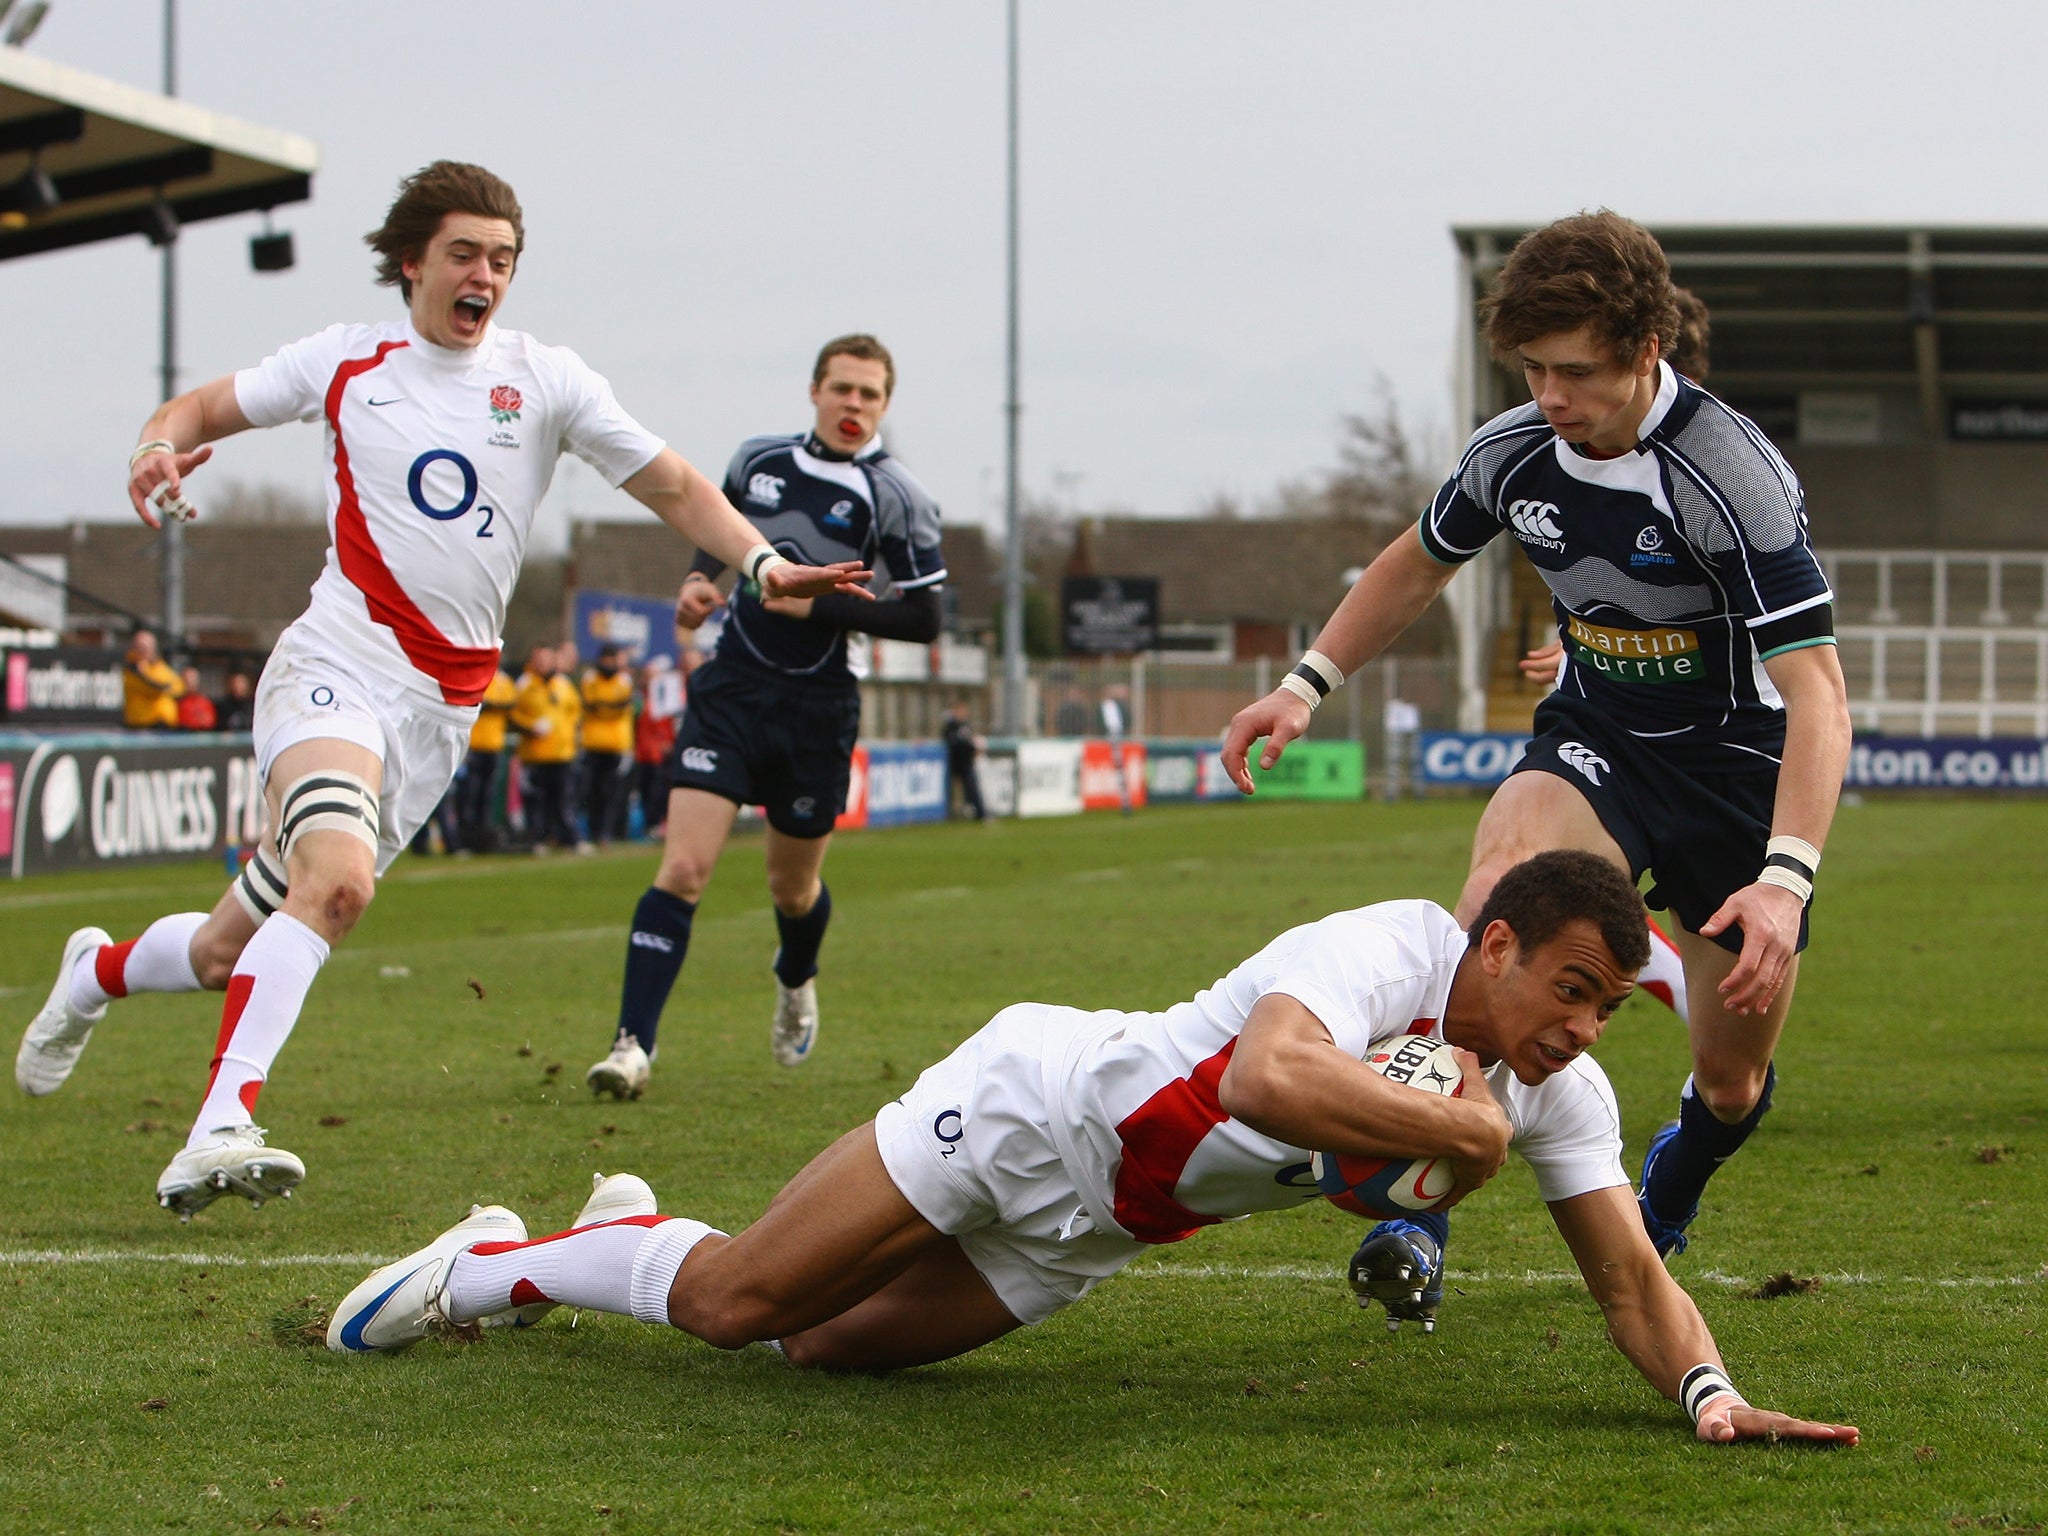 Jonathan Joseph scores a try for England in an Under-18 match against Scotland at
Kingston Park in 2009